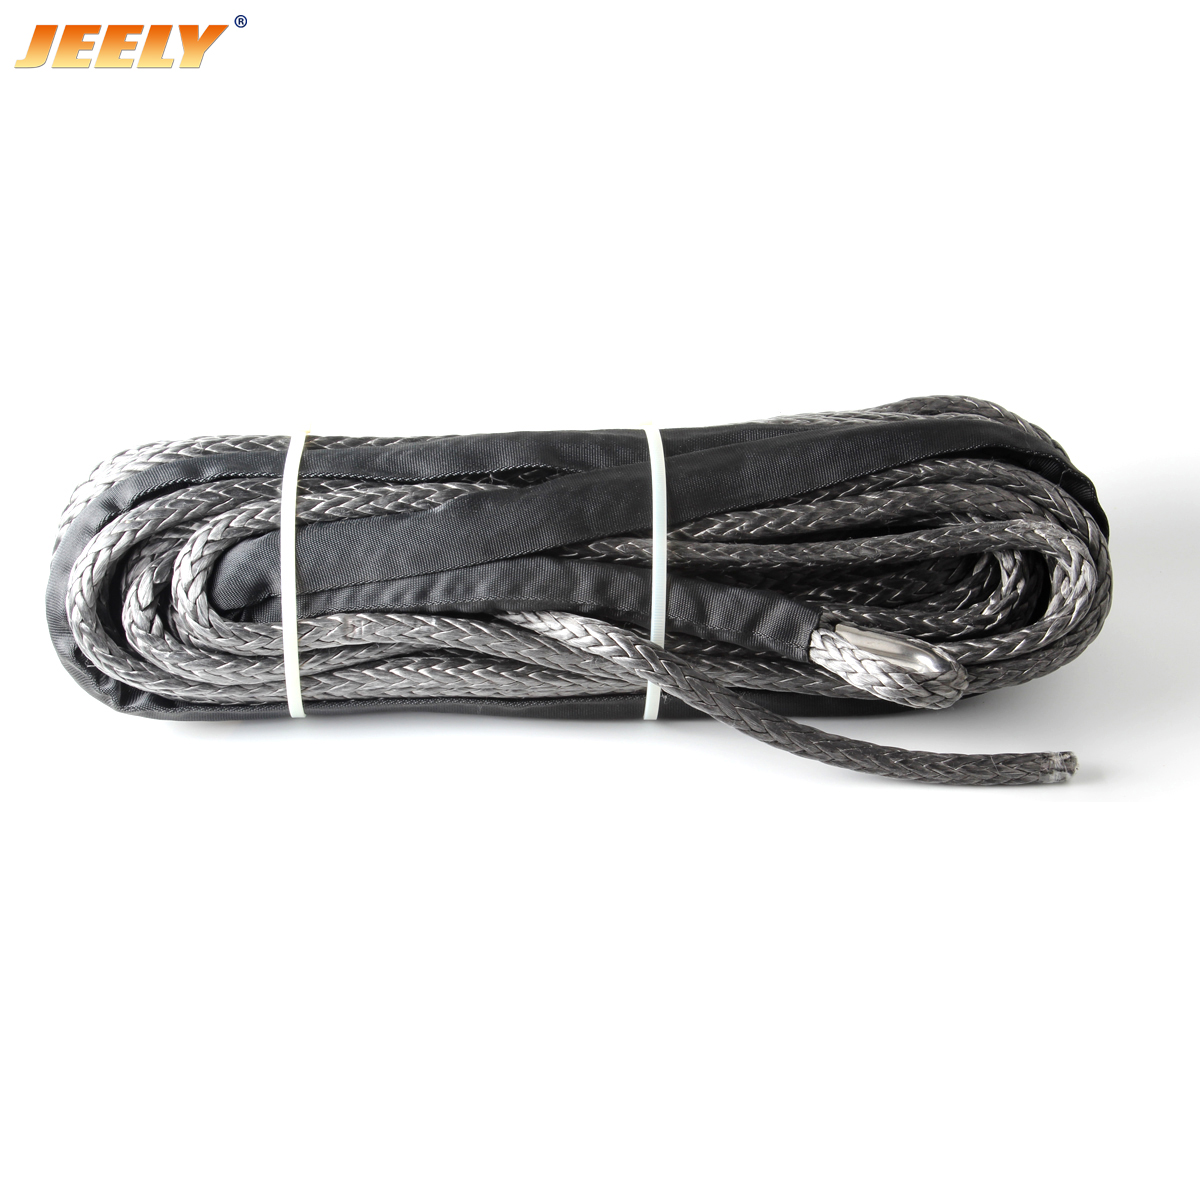 jeely 6mm*30m 12 strand off-road uhmwpe synthetic towing winch rope with 1.5m sleeve and thimble for ATV/UTV/SUV/4X4/4WD